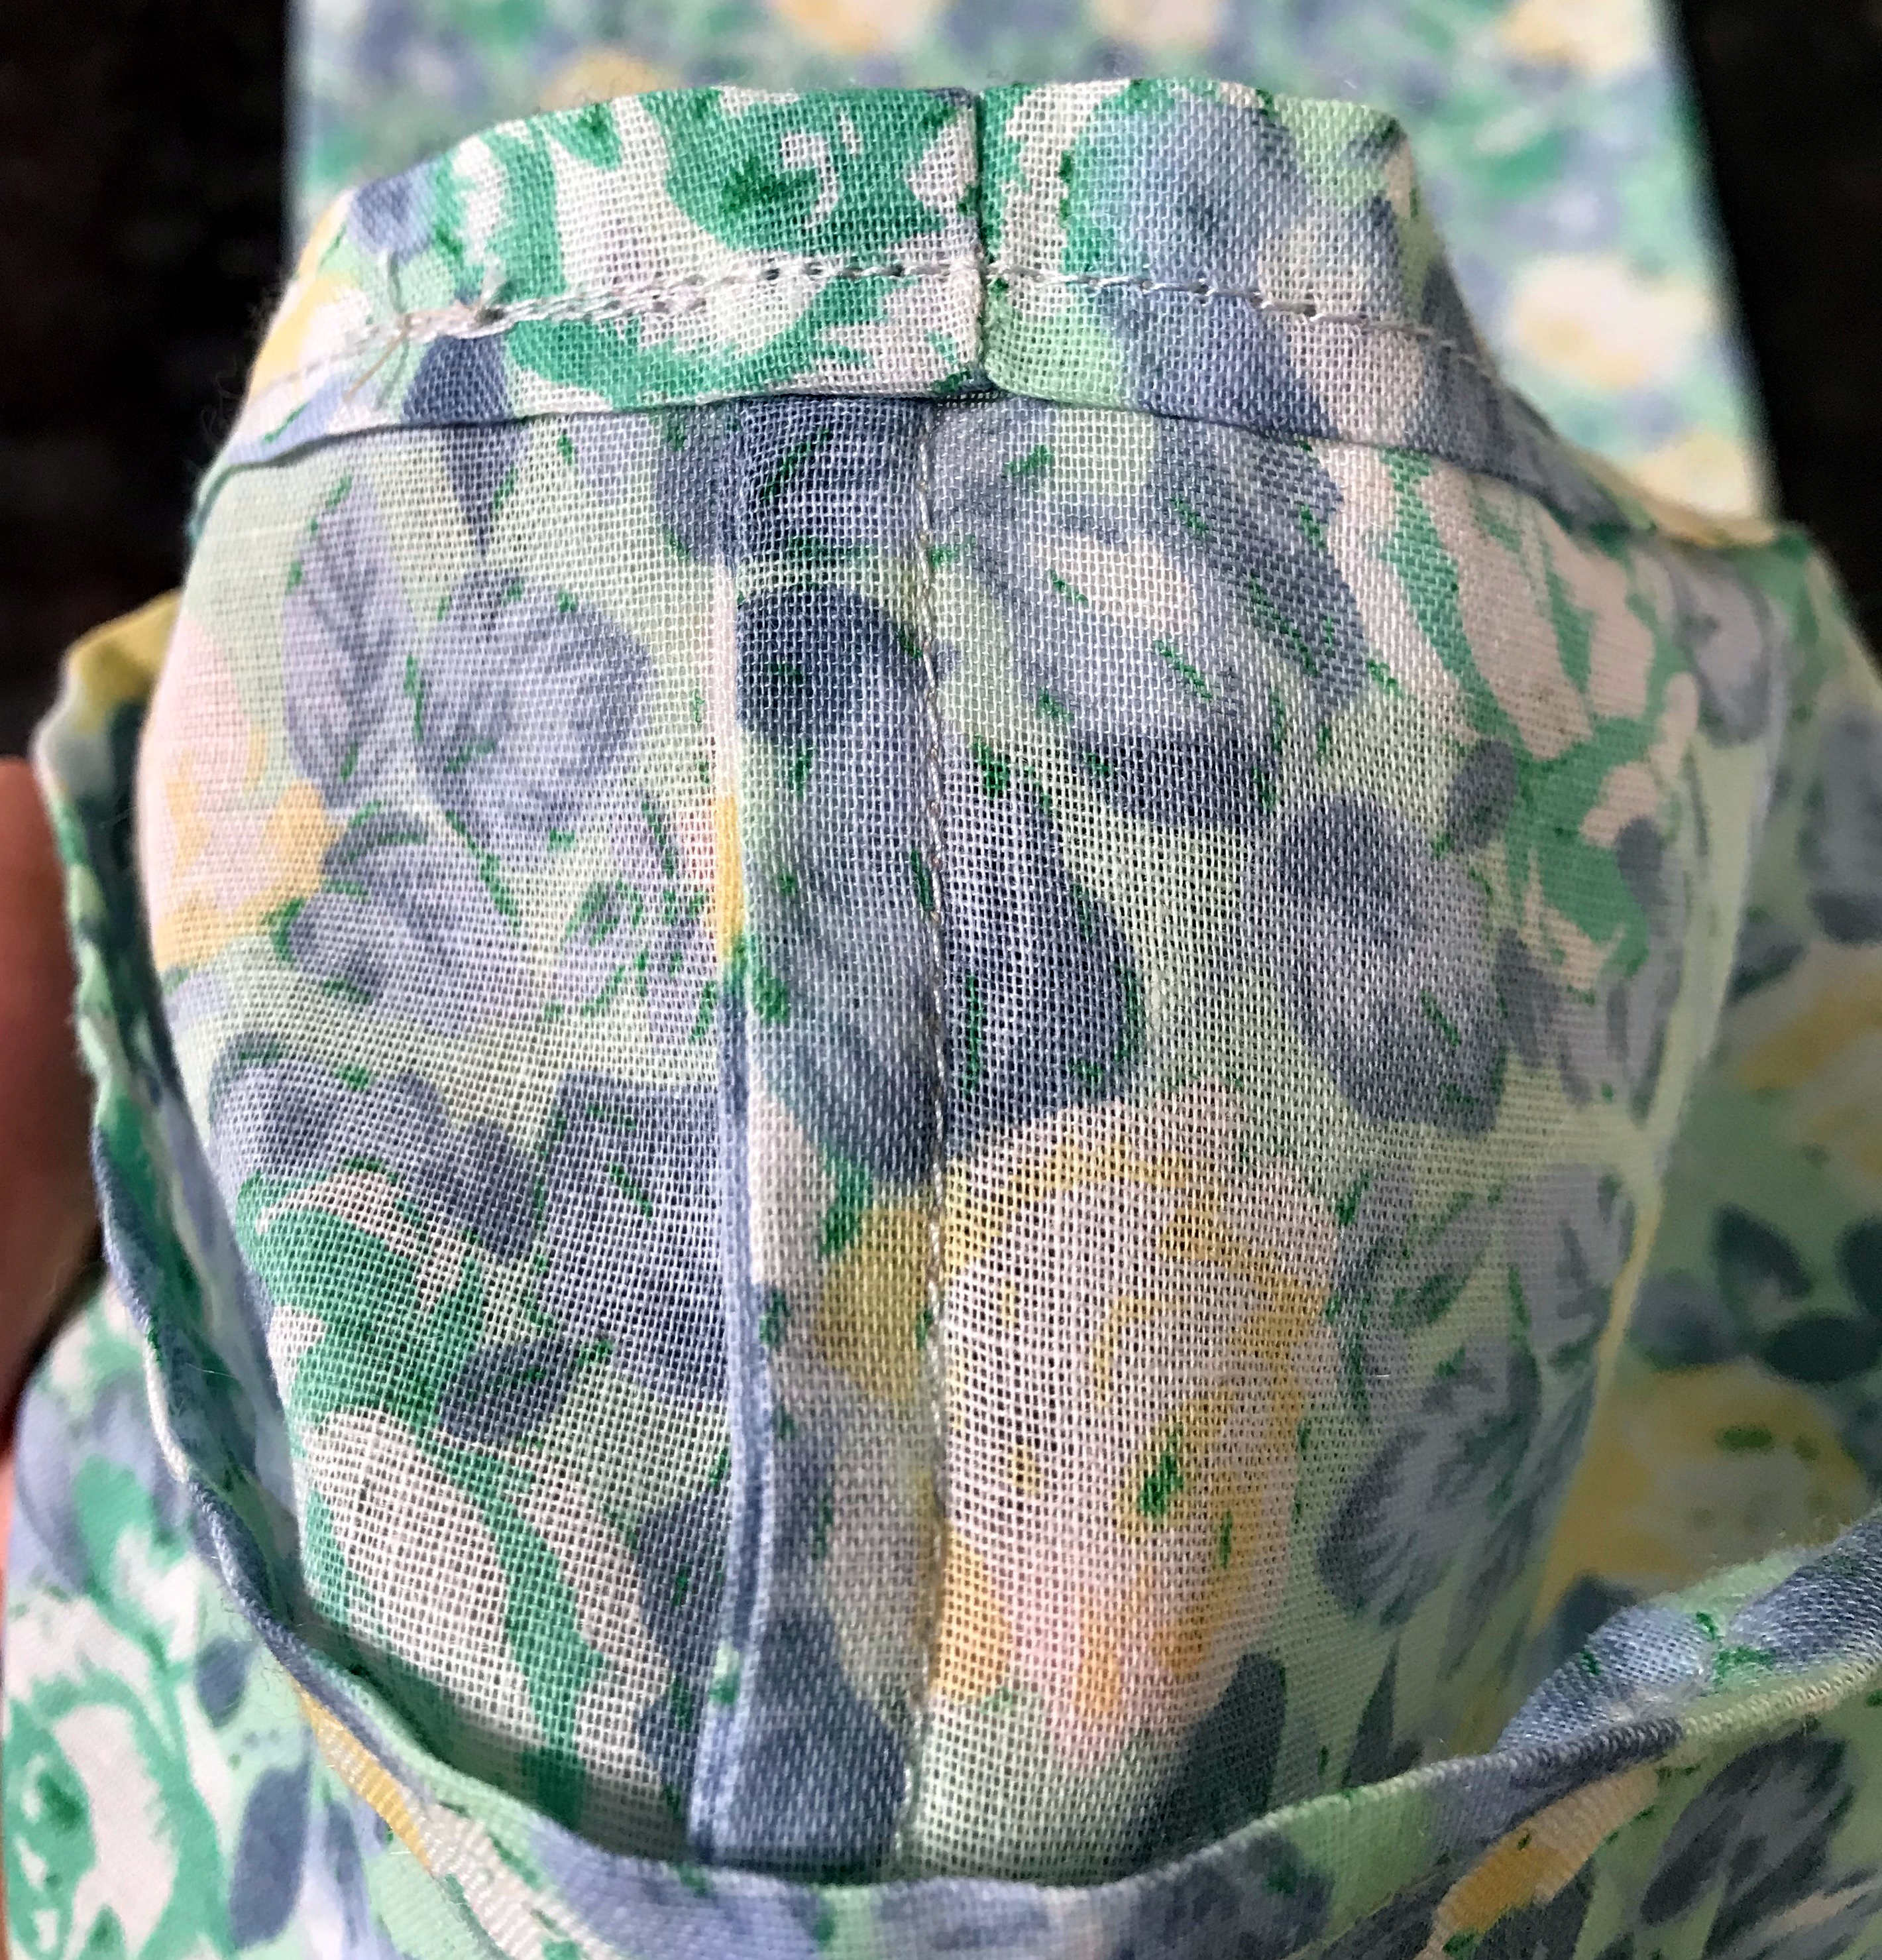 French seam inside a clothe produce bag for plastic free and zero waste shopping